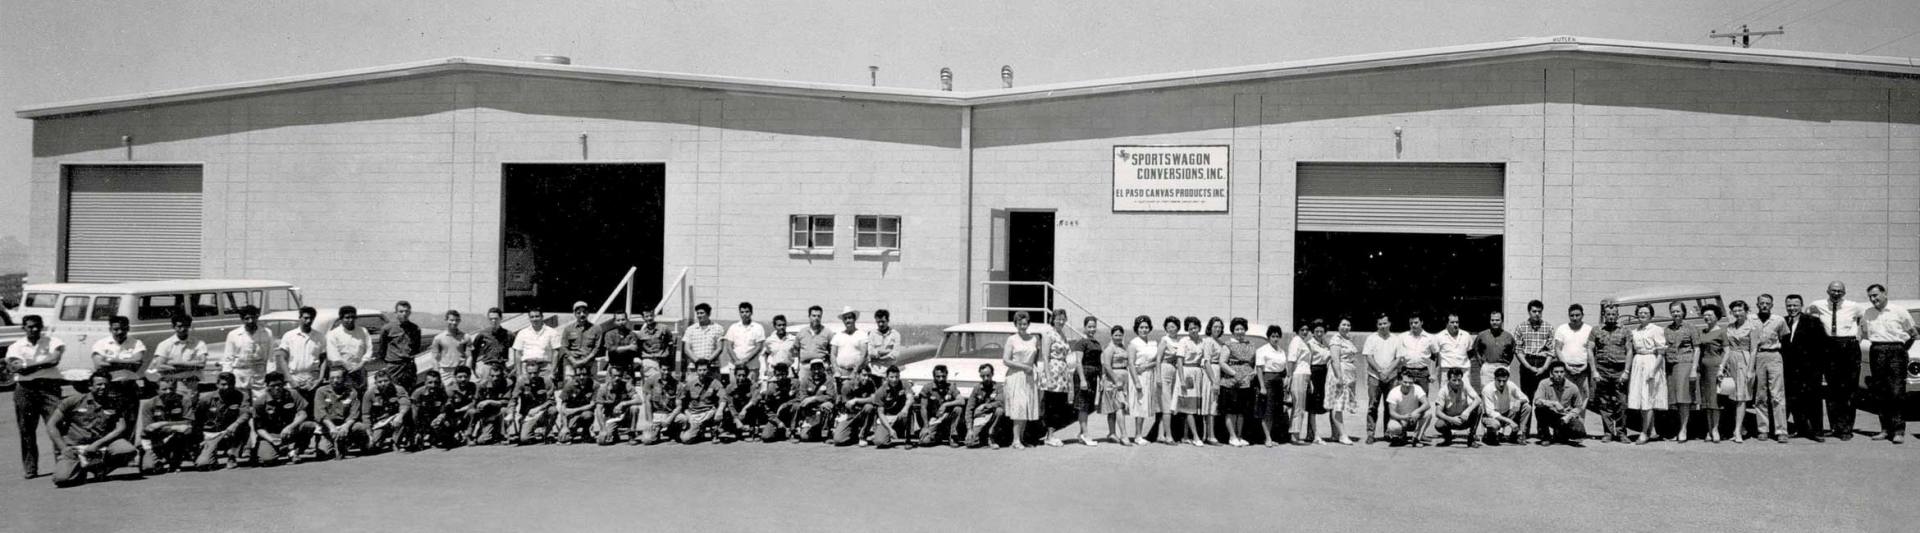 Sportsmobile 1961 Factory and Work Crew